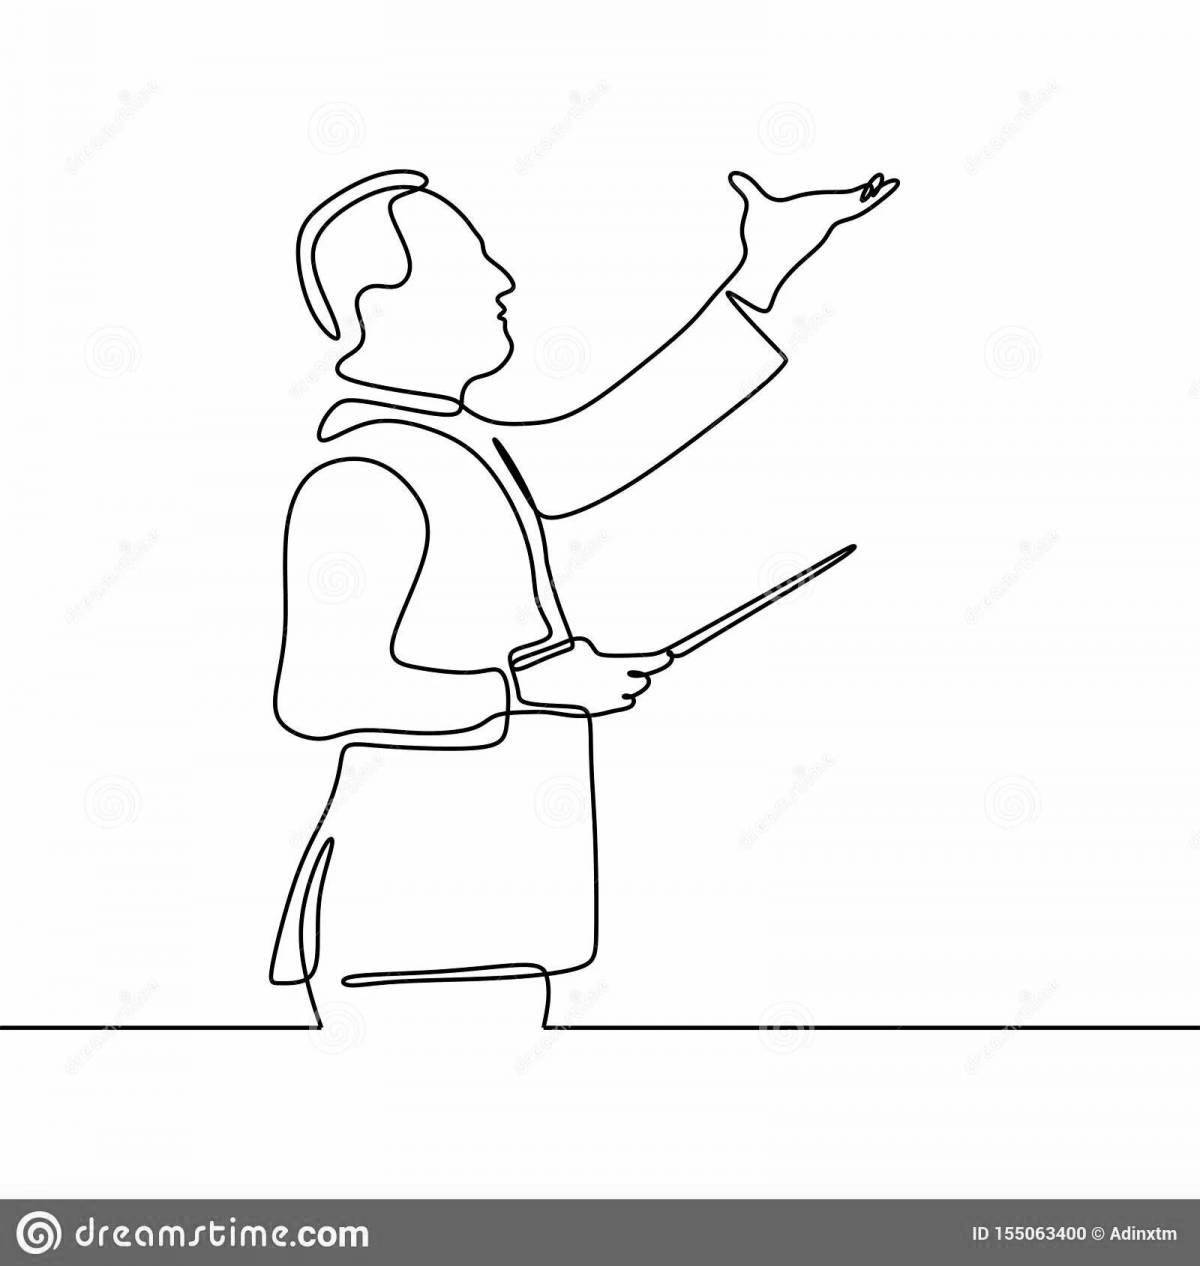 Coloring page of the striking conductor